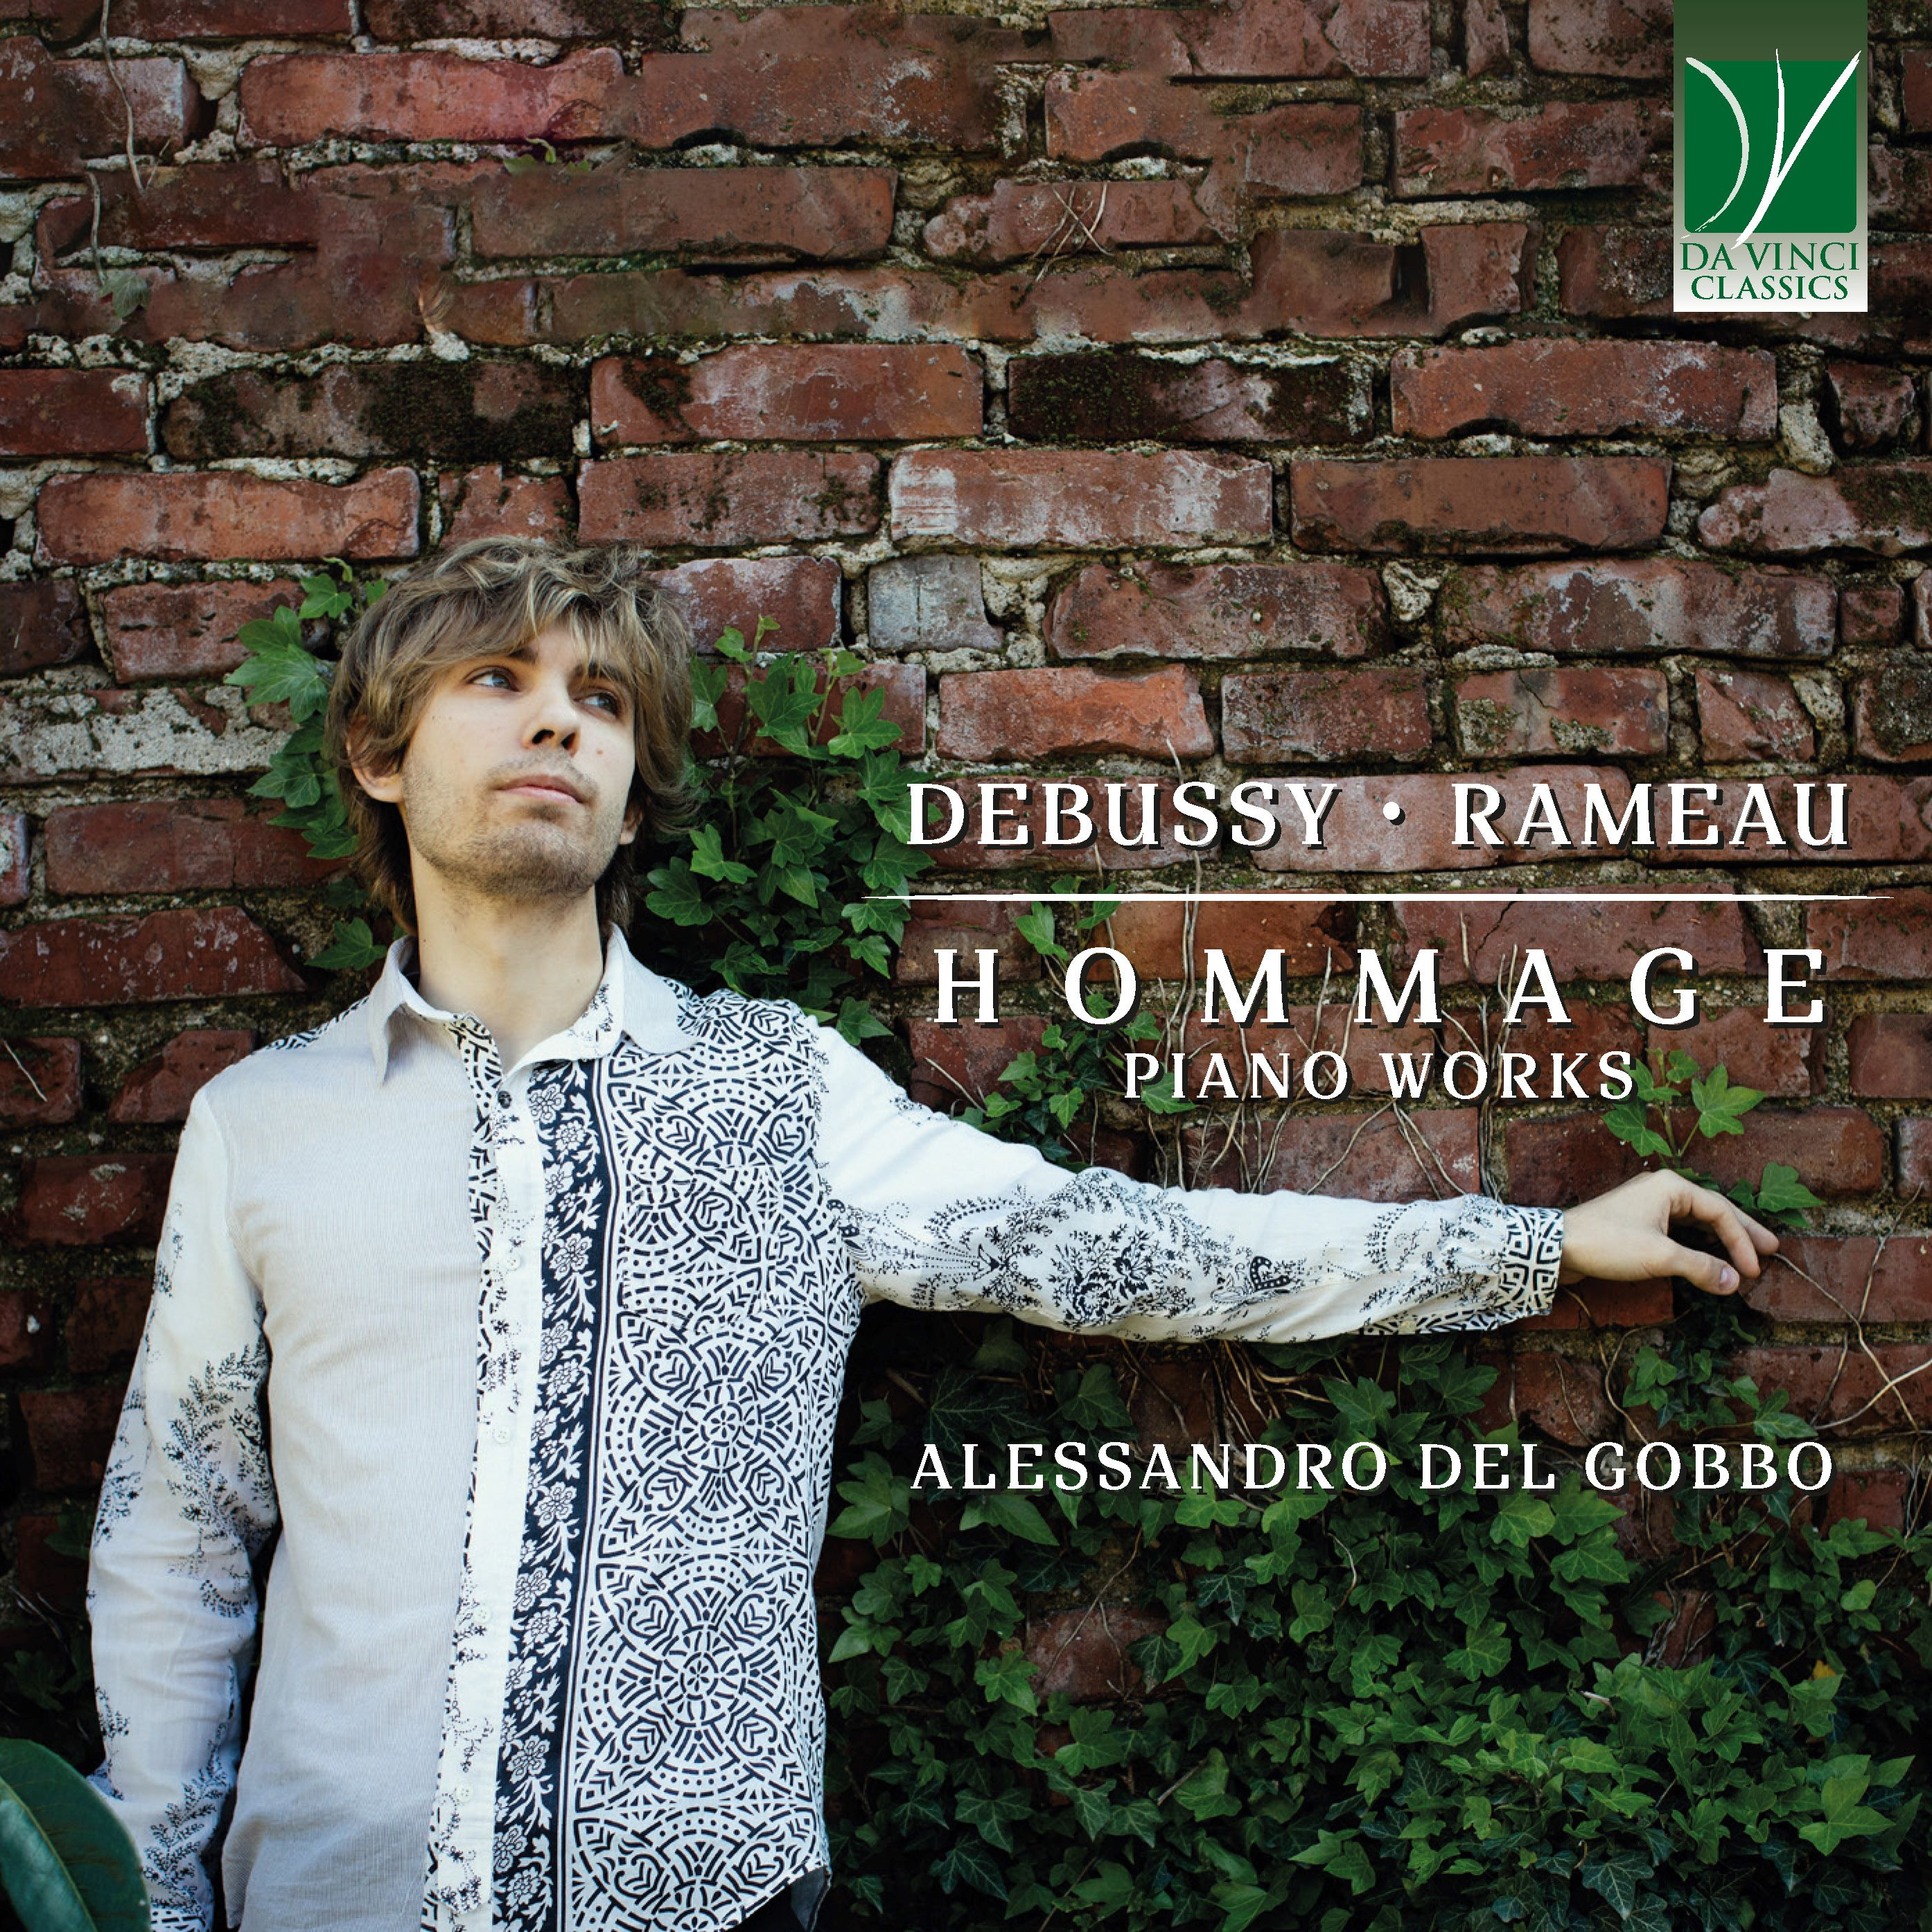 CLAUDE DEBUSSY, JEAN-PHILIPPE RAMEAU: HOMMAGE, PIANO WORKS